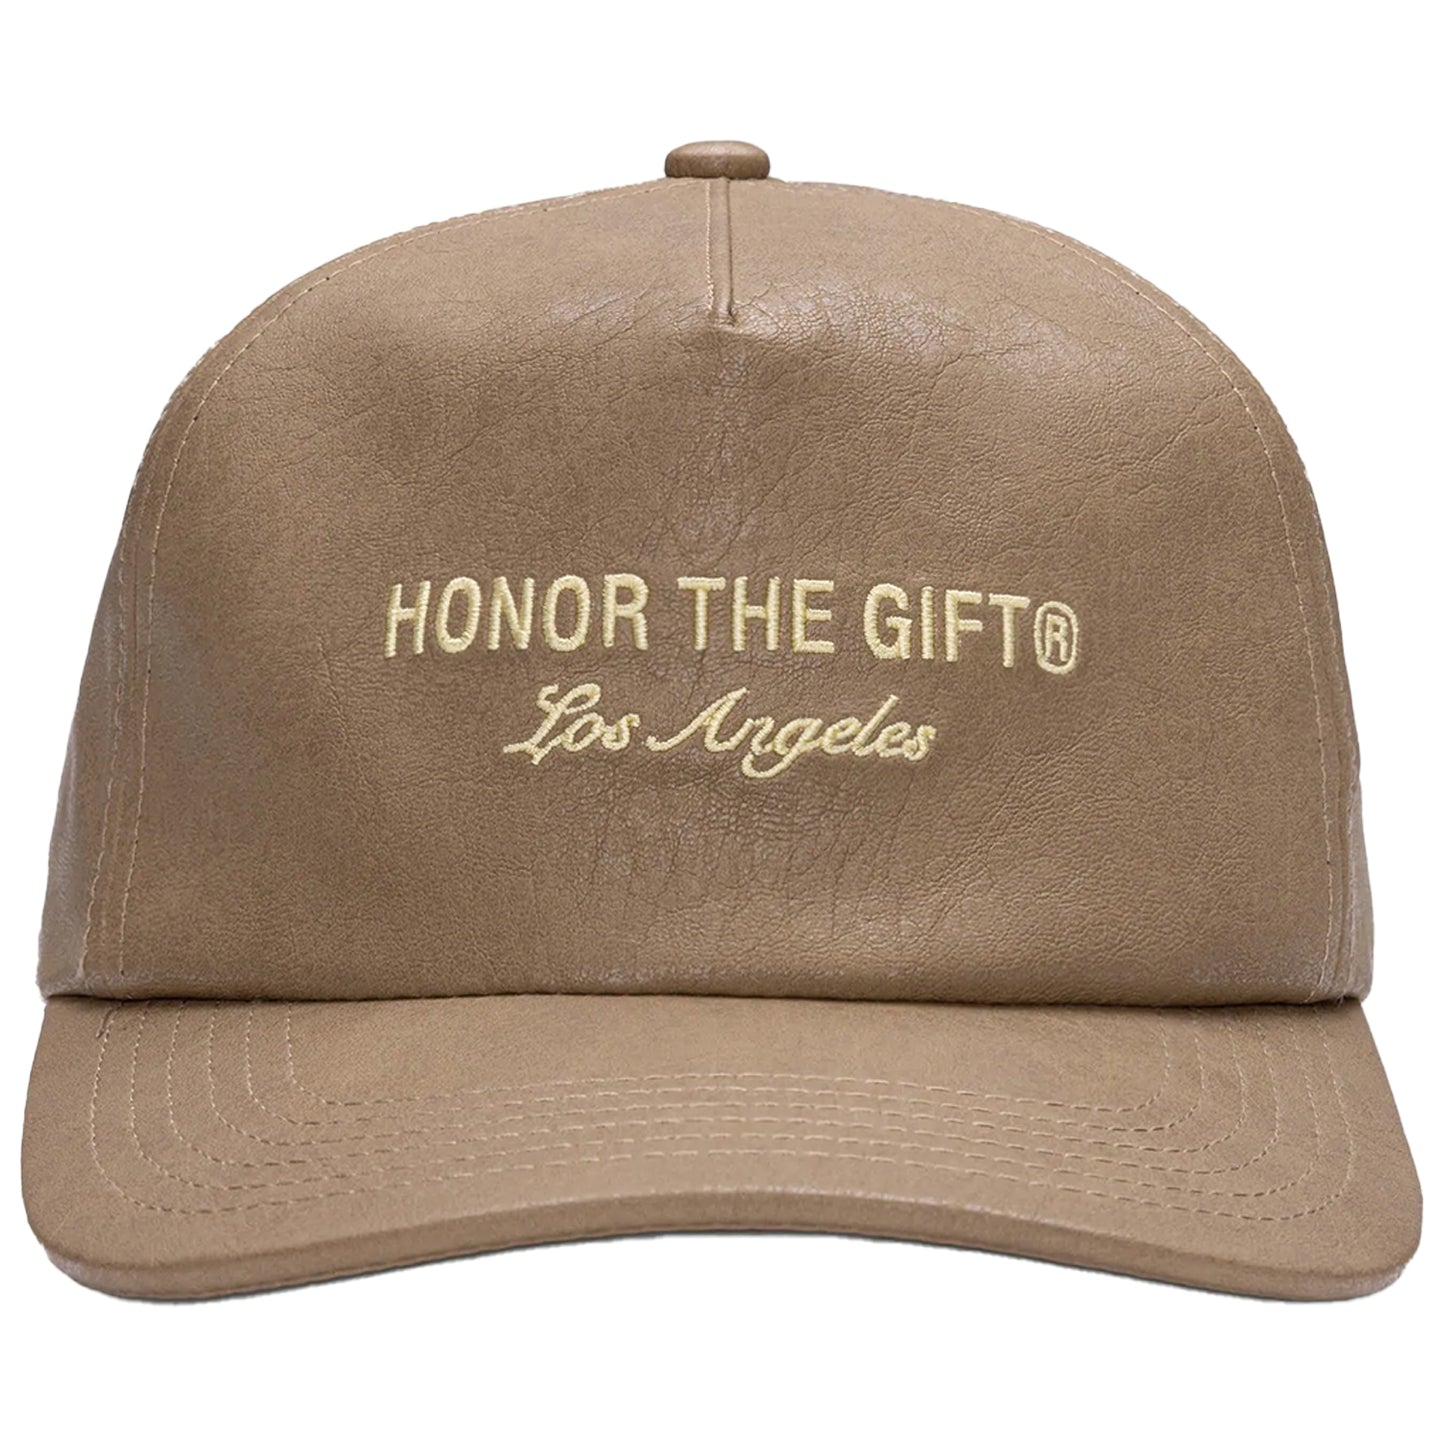 HONOR THE GIFT LOS ANGELES - HAT